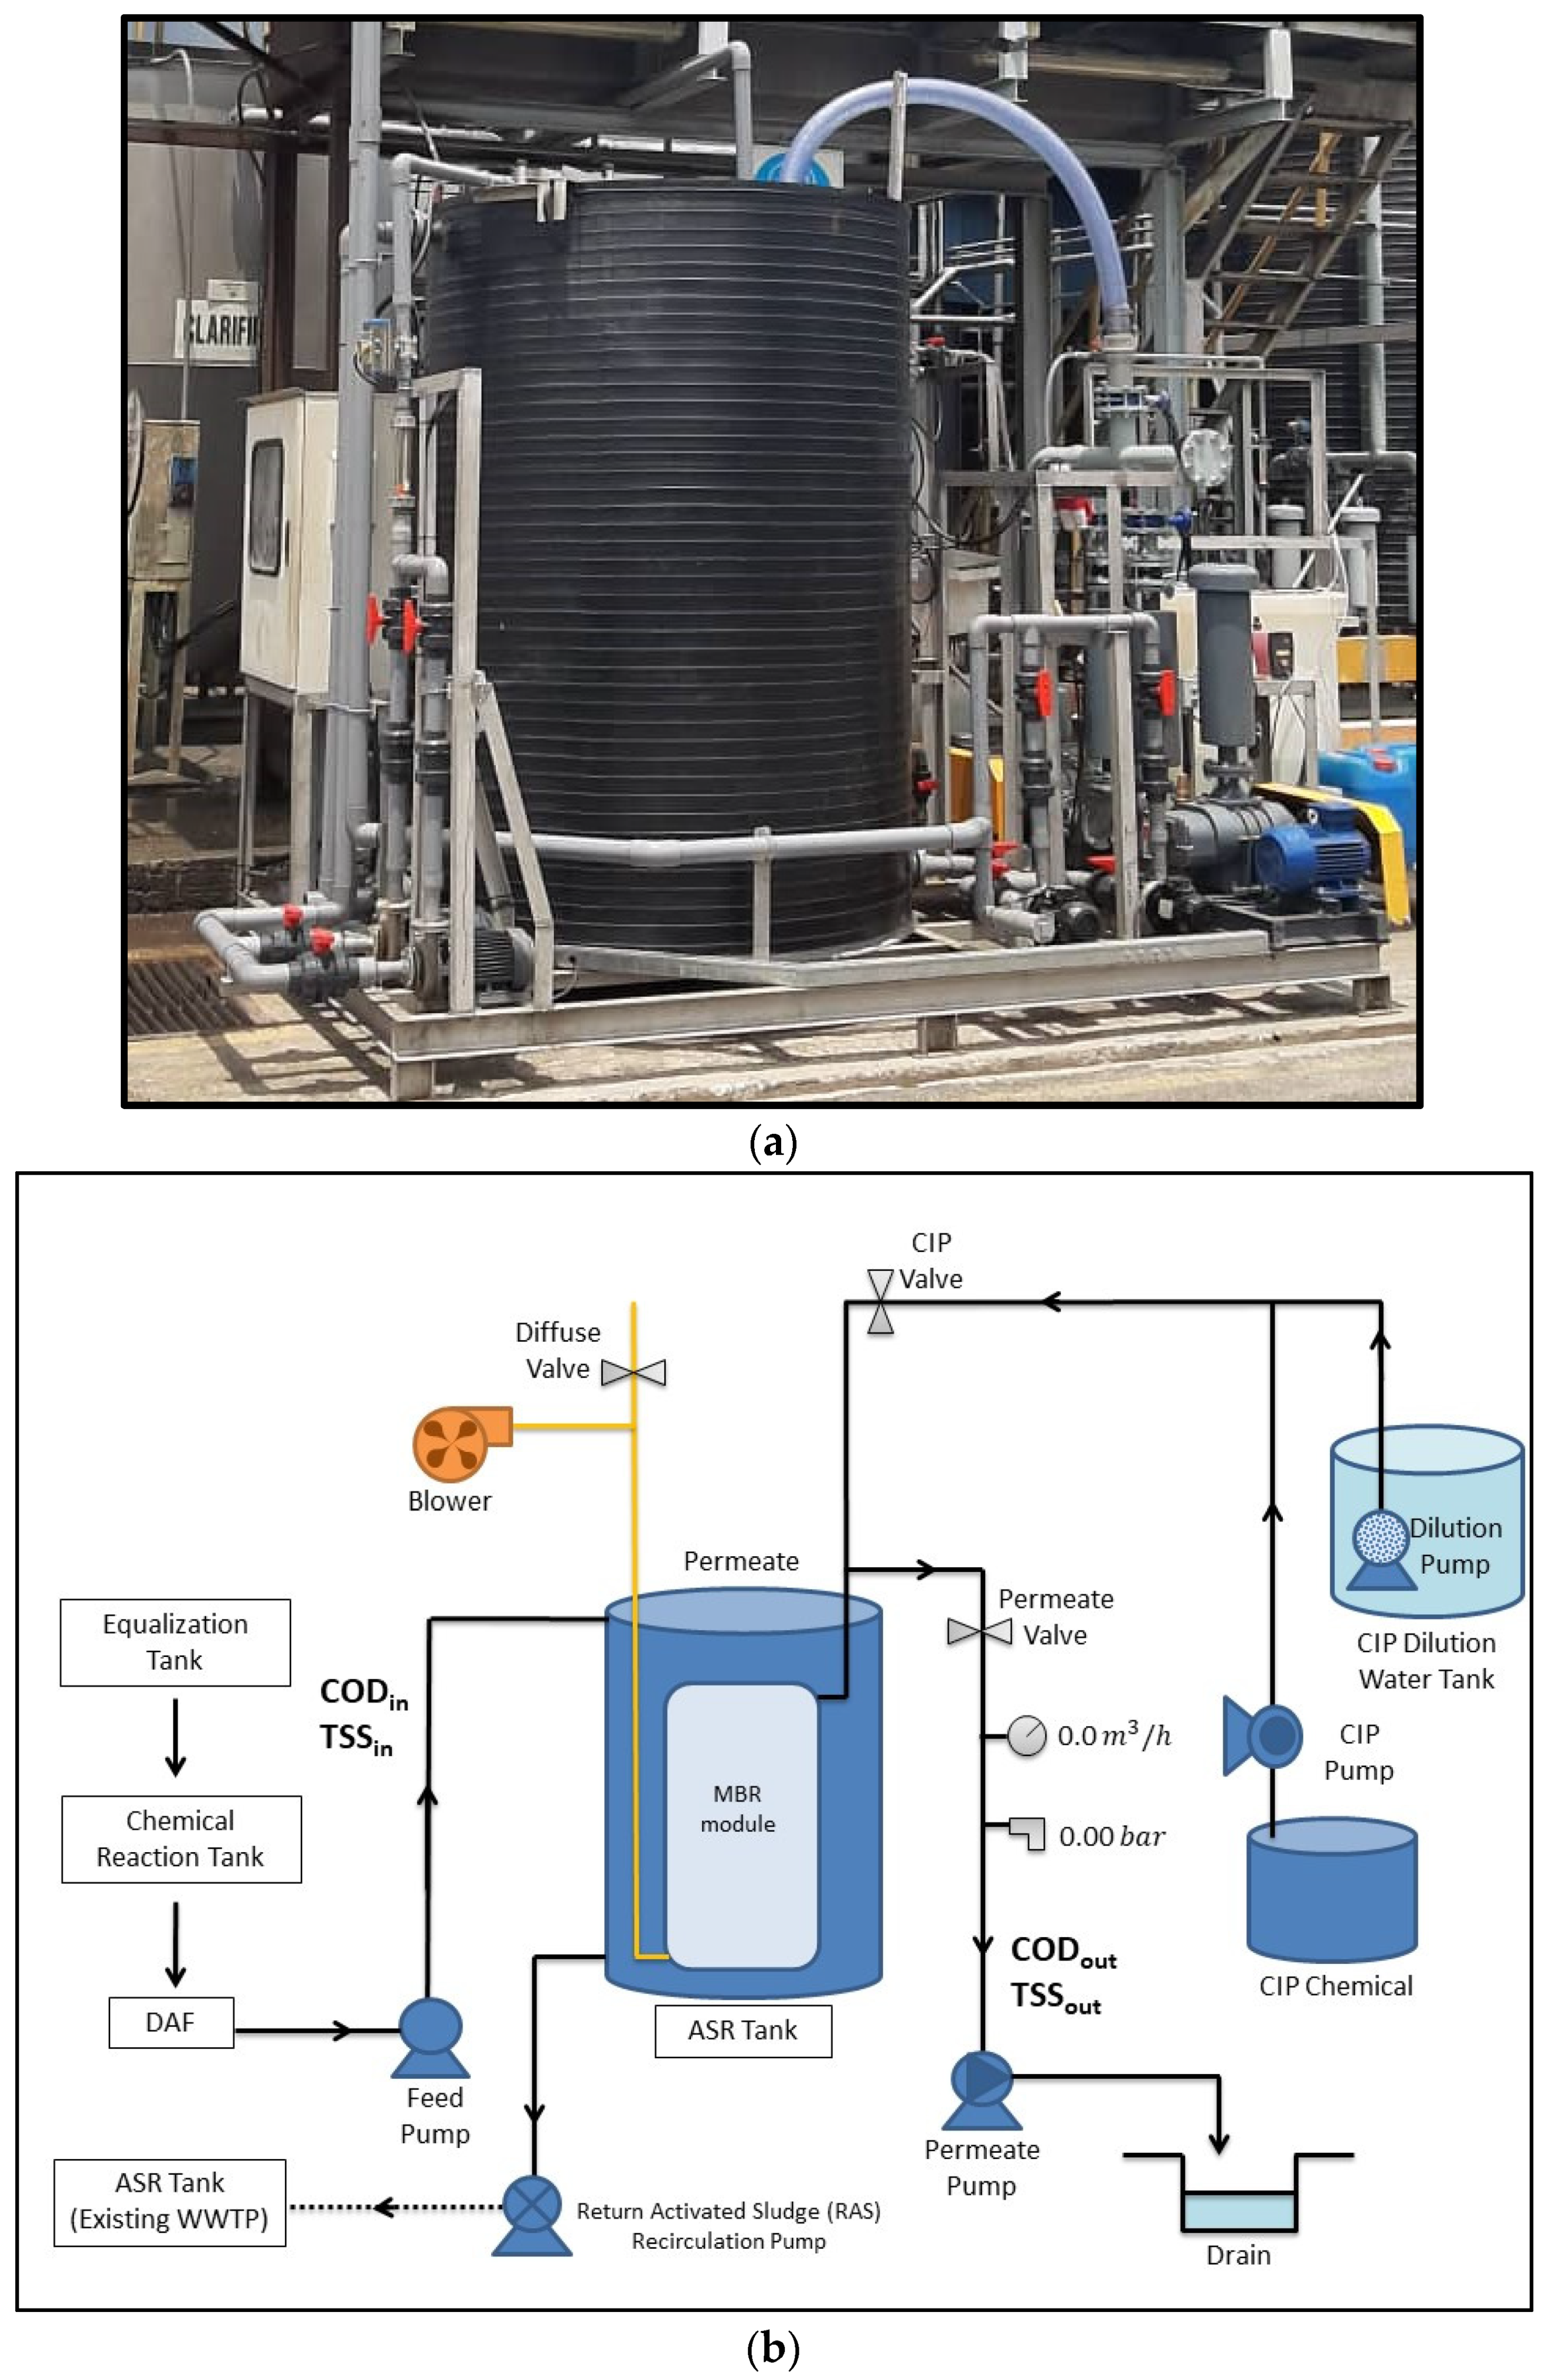 Membranes Free Full Text Treatment Of Wastewater From A Food And Beverage Industry Using Conventional Wastewater Treatment Integrated With Membrane Bioreactor System A Pilot Scale Case Study Html